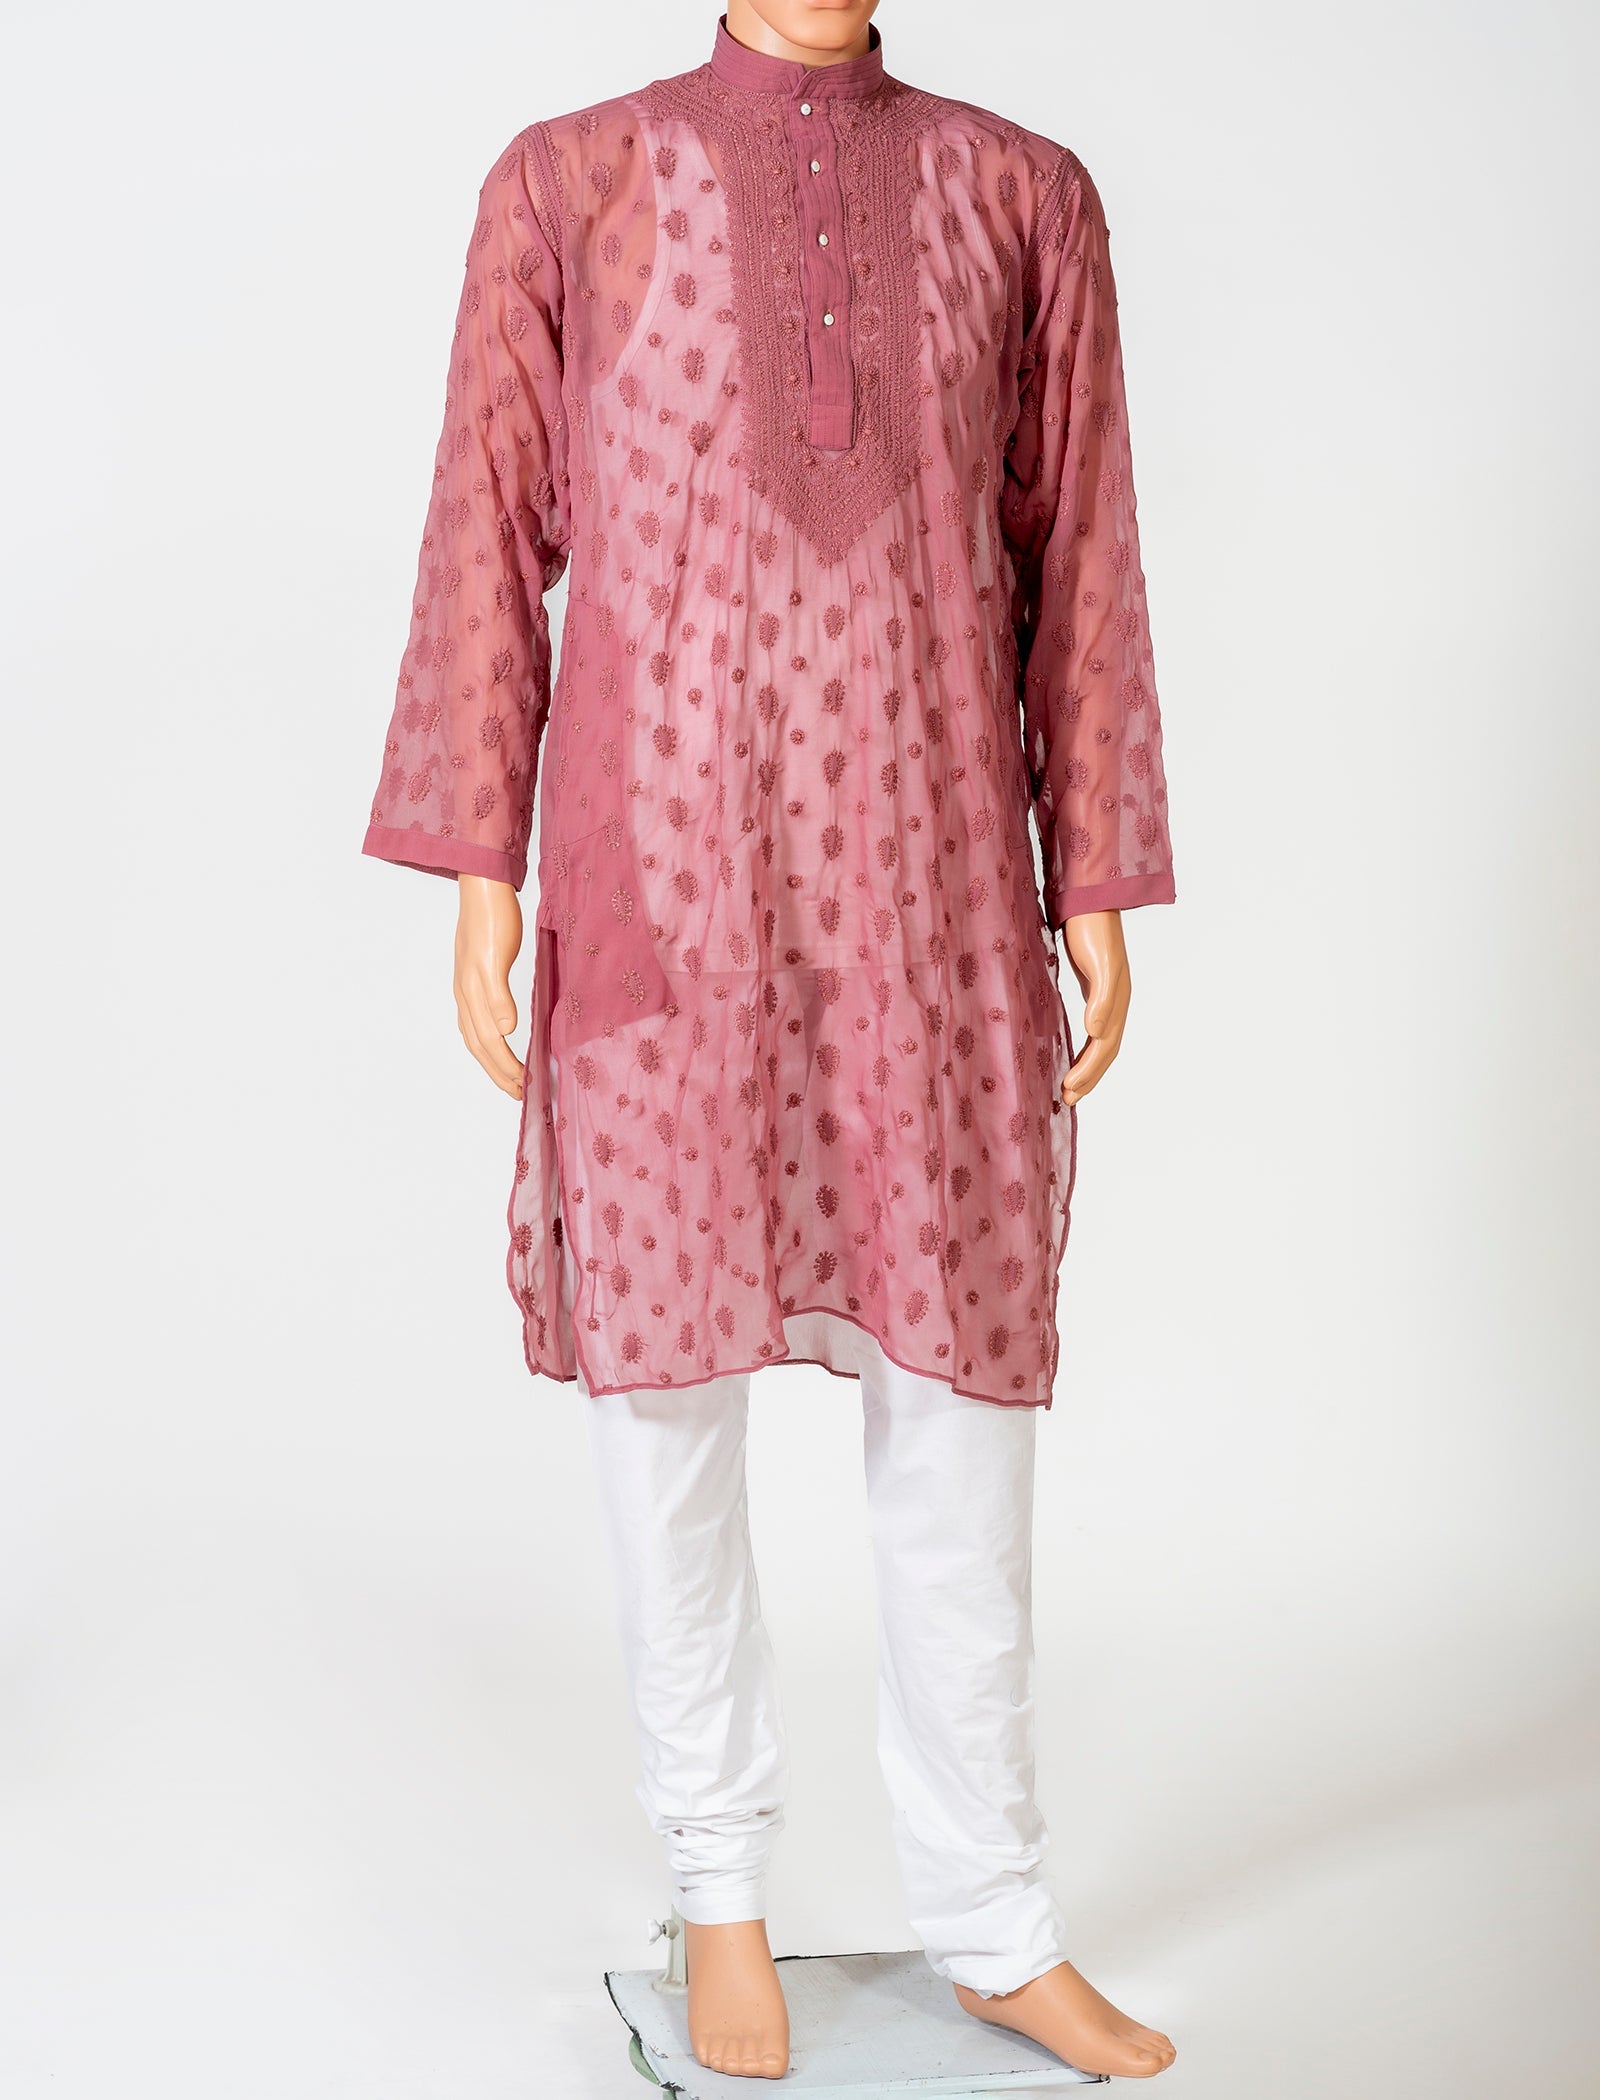 Lucknow Chikan Emporium Georgette Purple Colour Gents Kurta With Self Stripes And Fancy Hand Chikankari On Neck.